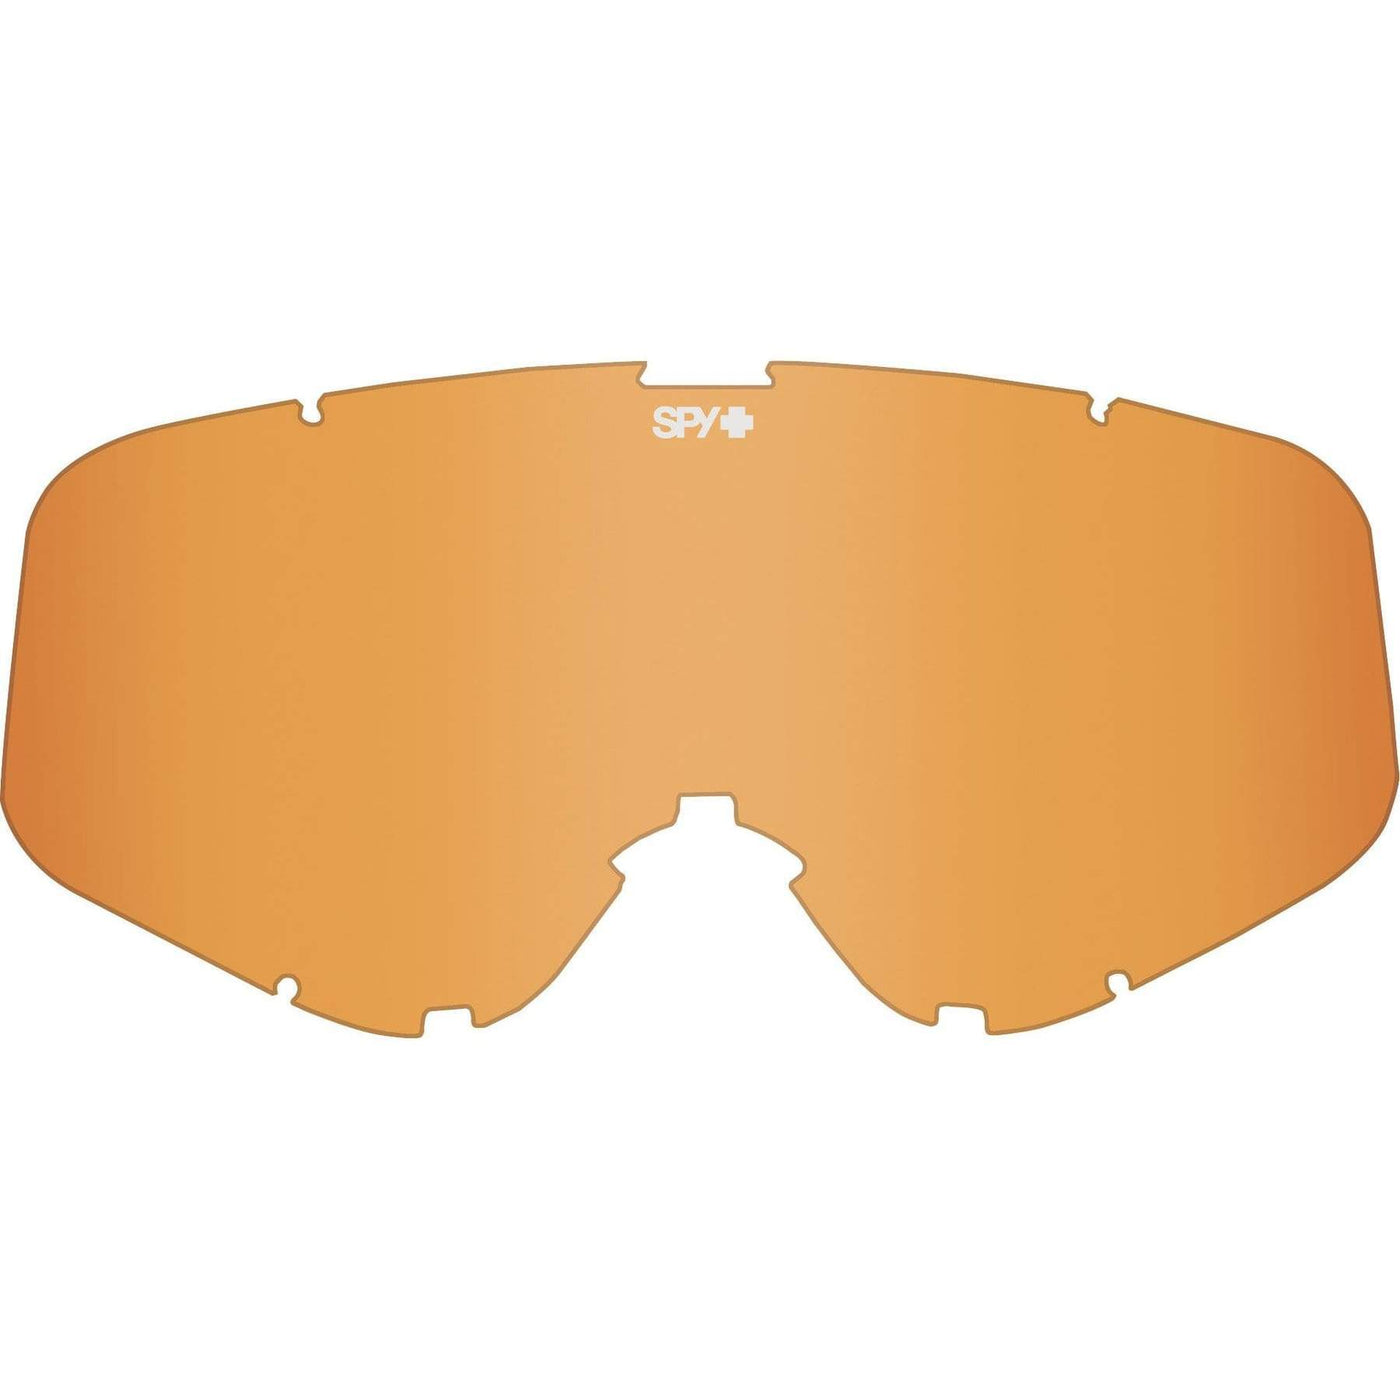 replacement lens for woot googles